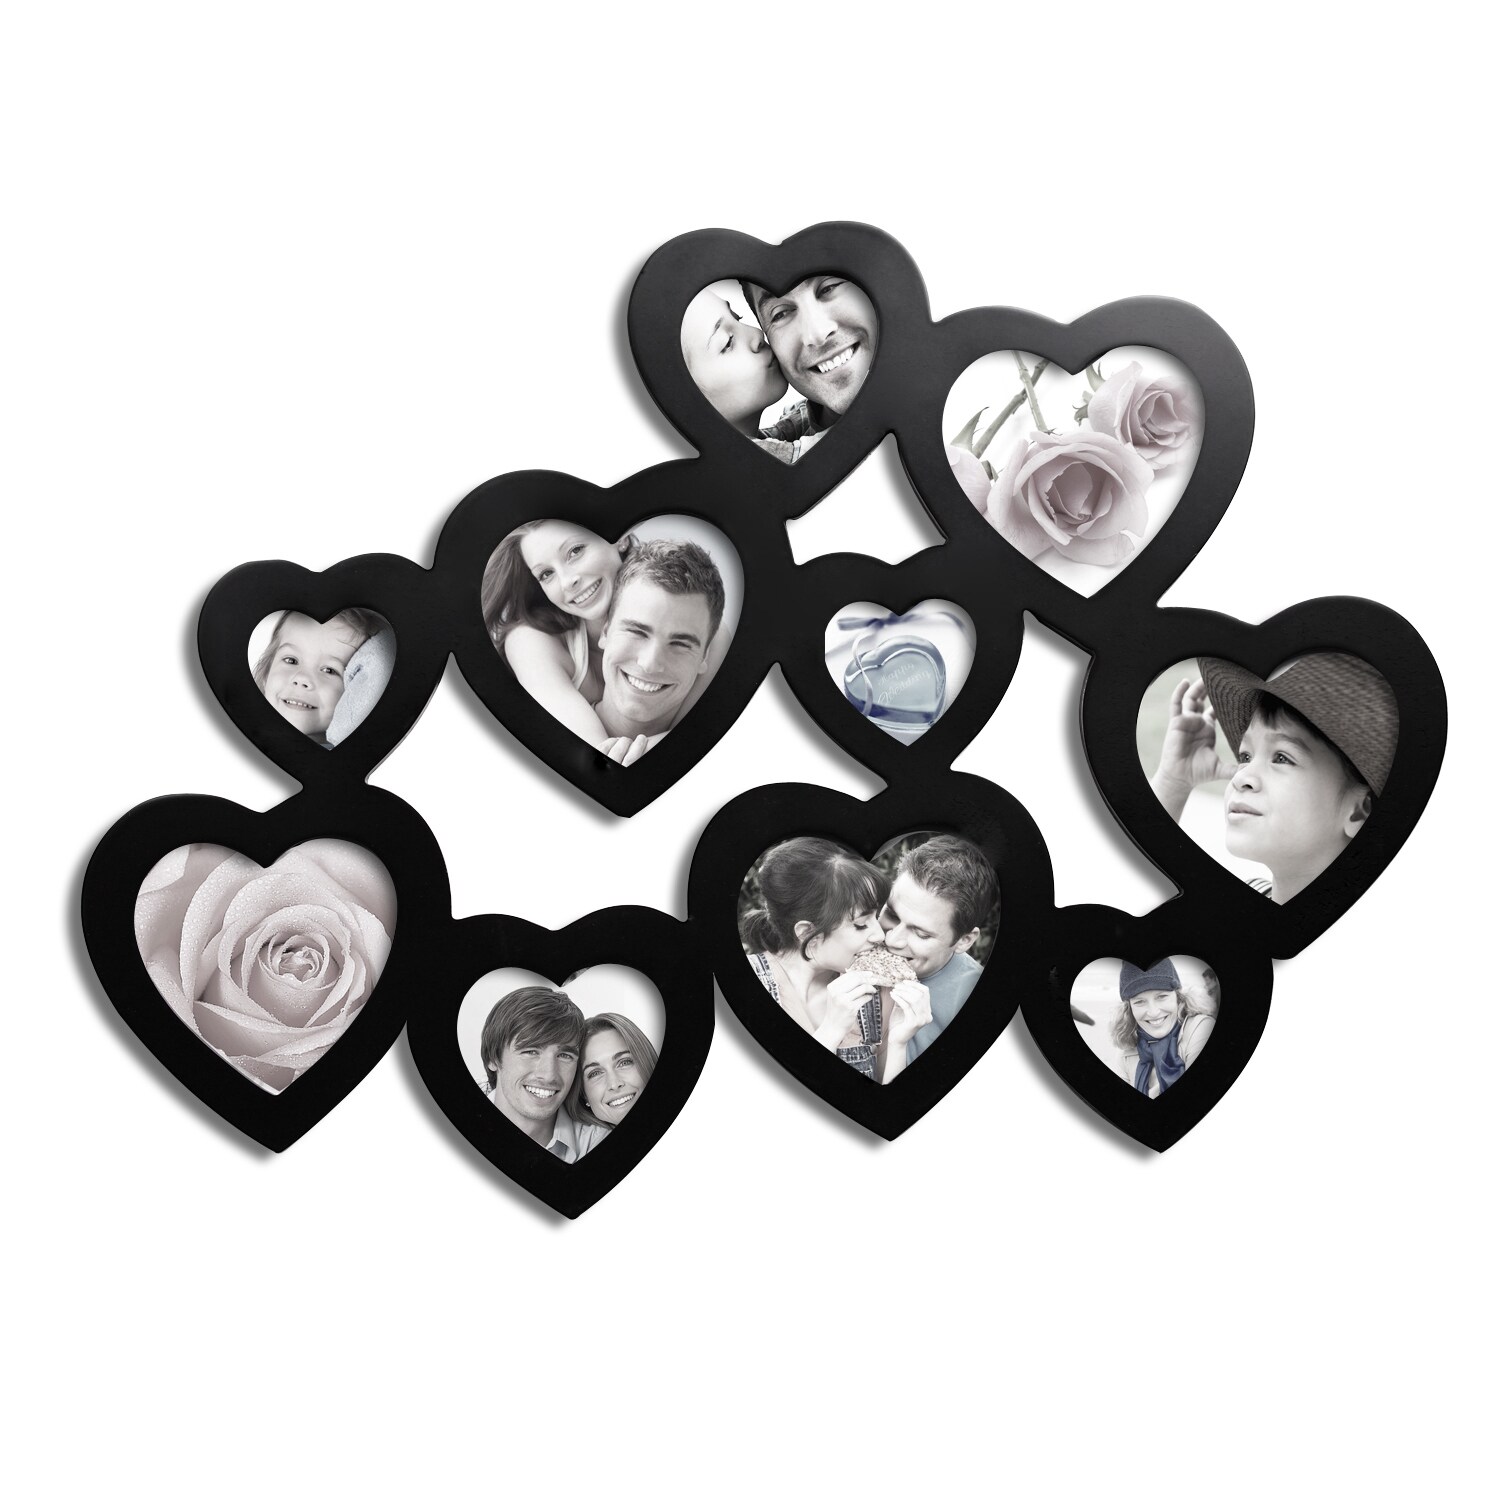 Adeco Adeco 10 photo Black Wood Heart shaped Picture Frame Black Size Other